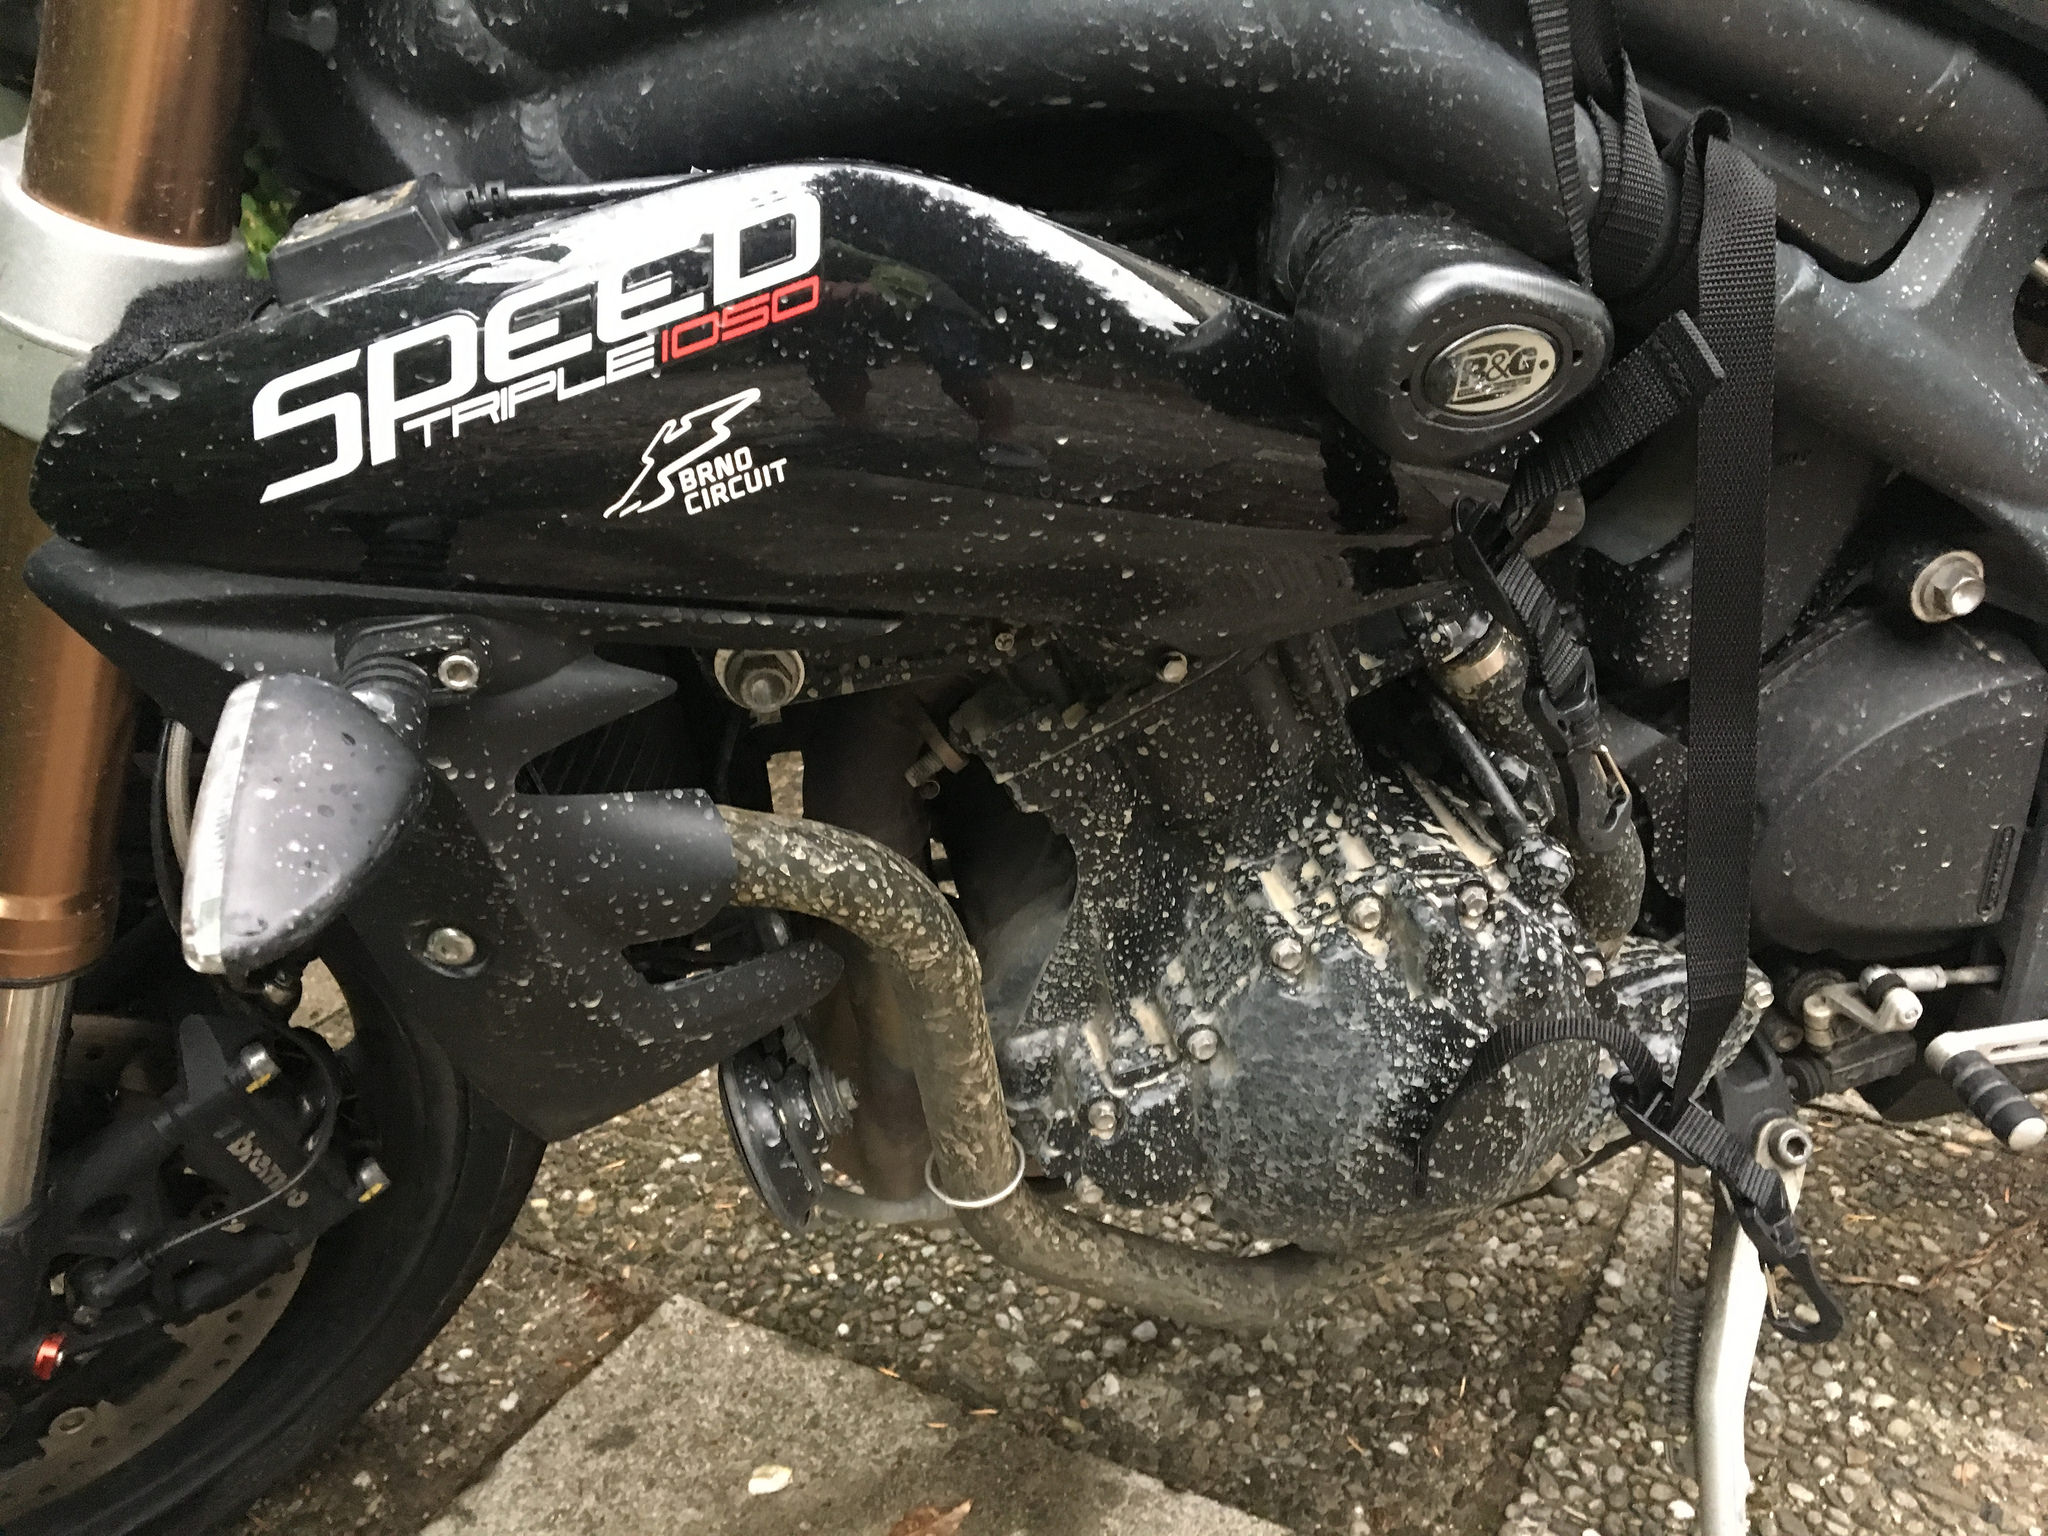 triumph speed triple dirty after water driving